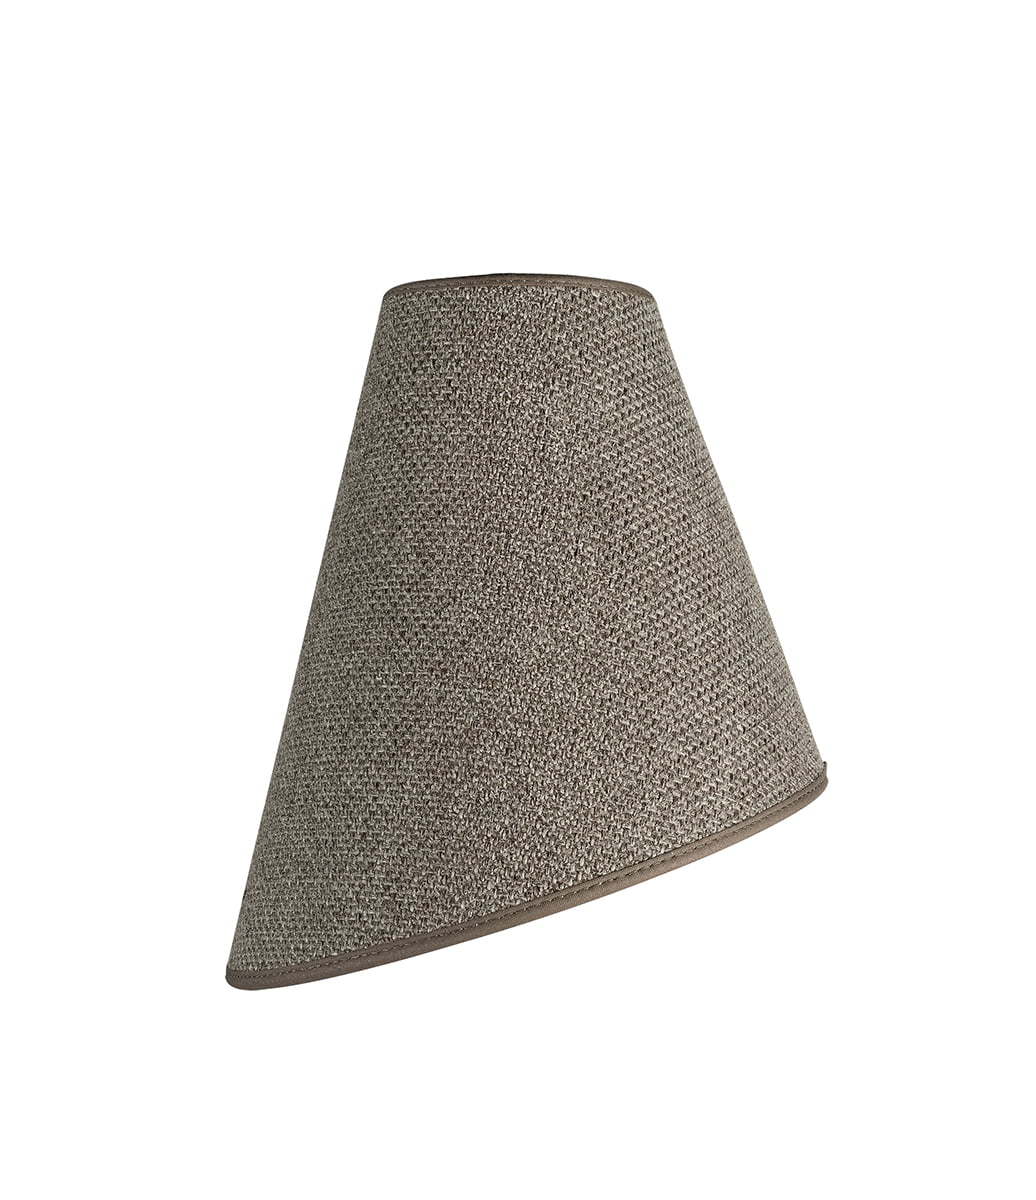 Artwood - Shade Cone Rave Liver